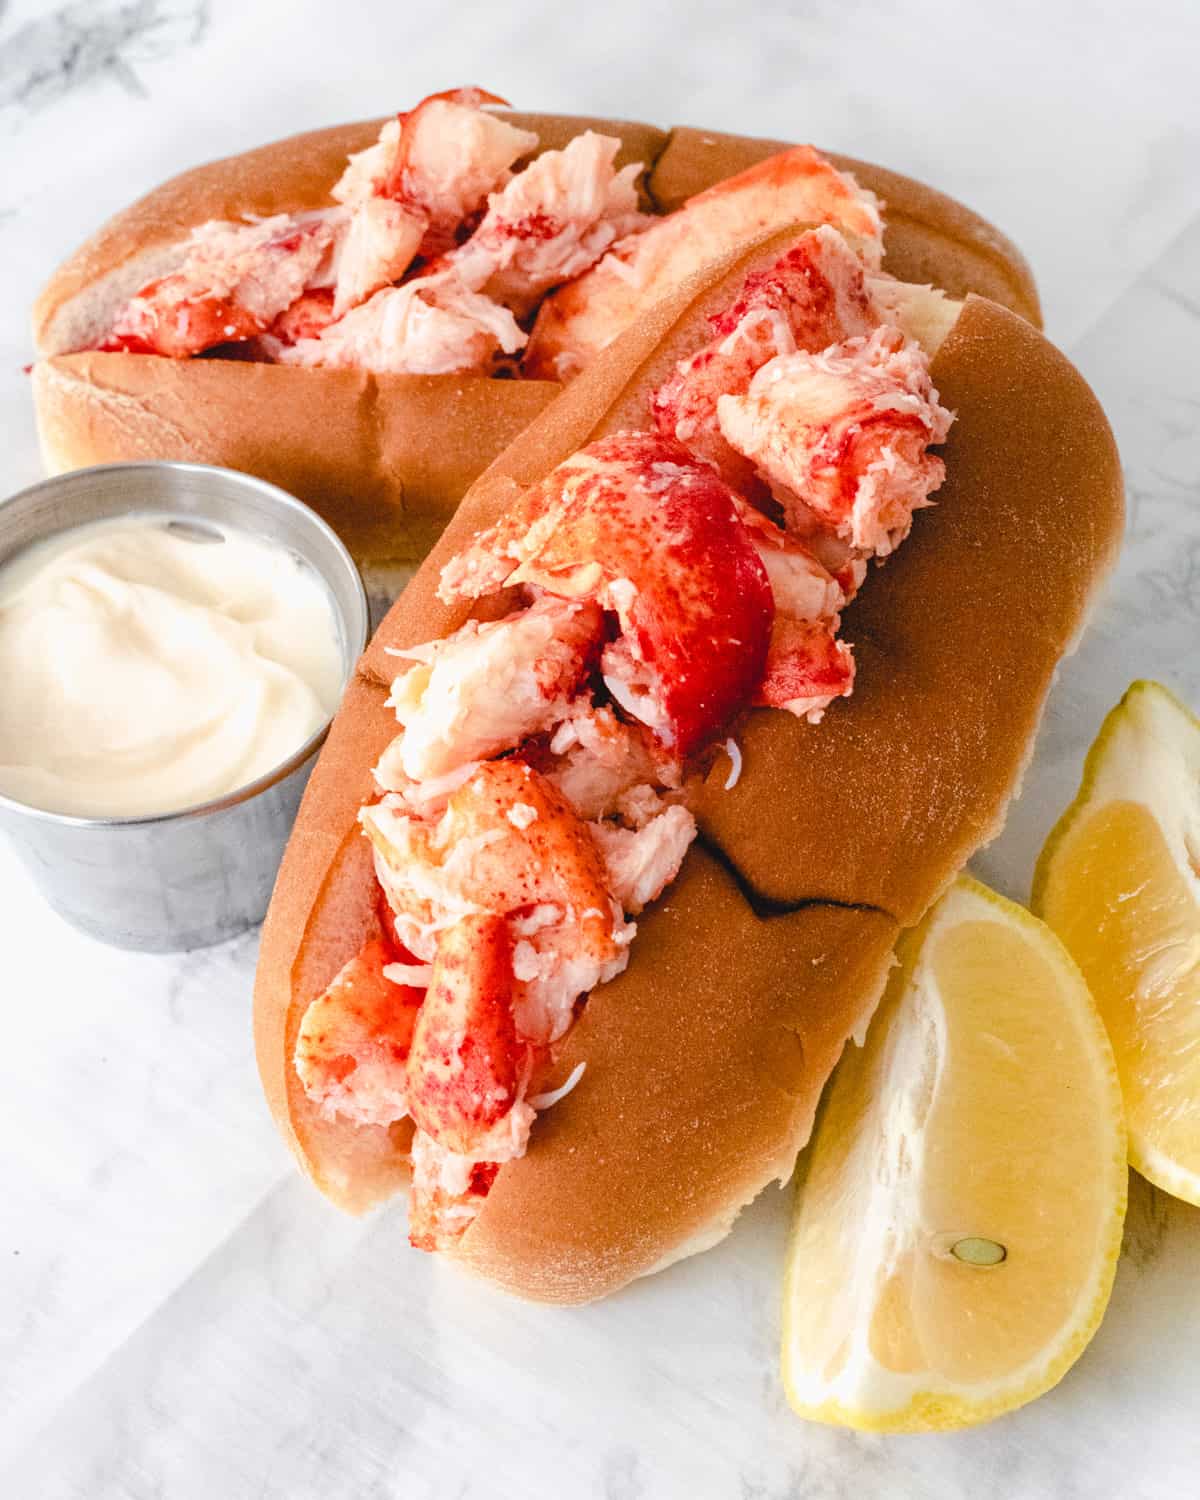 Two lobster rolls with a ramekin of mayo on the left and 2 lemon wedges on the right.